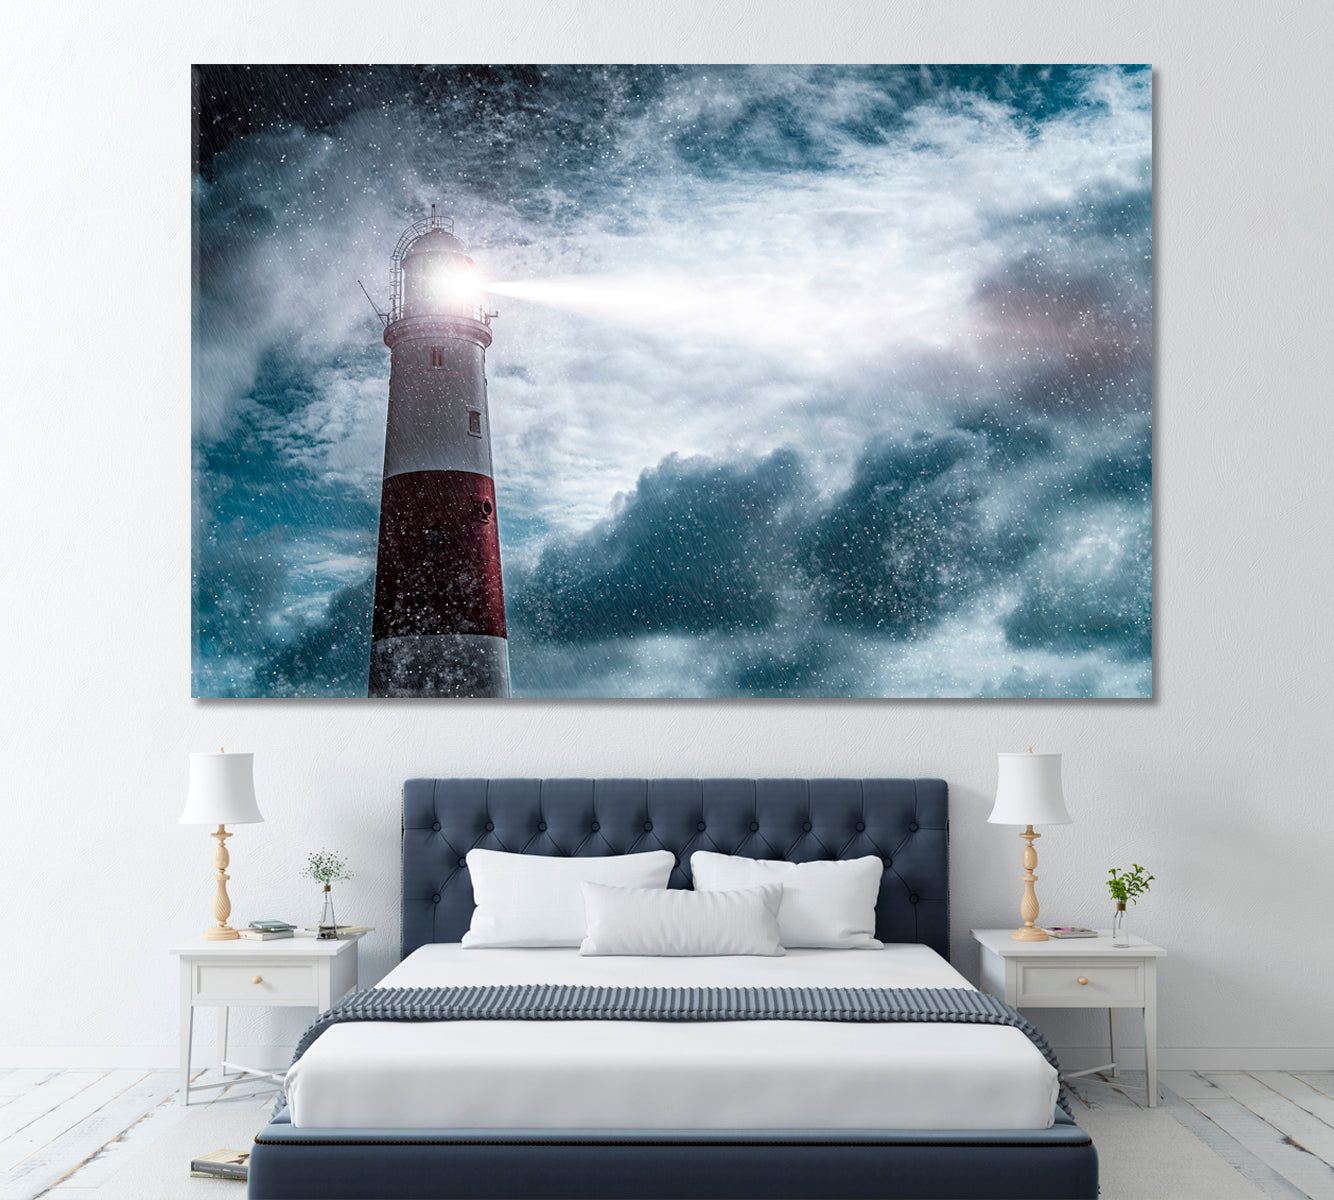 Lighthouse in Storm Shines in Sea Canvas Print ArtLexy 1 Panel 24"x16" inches 